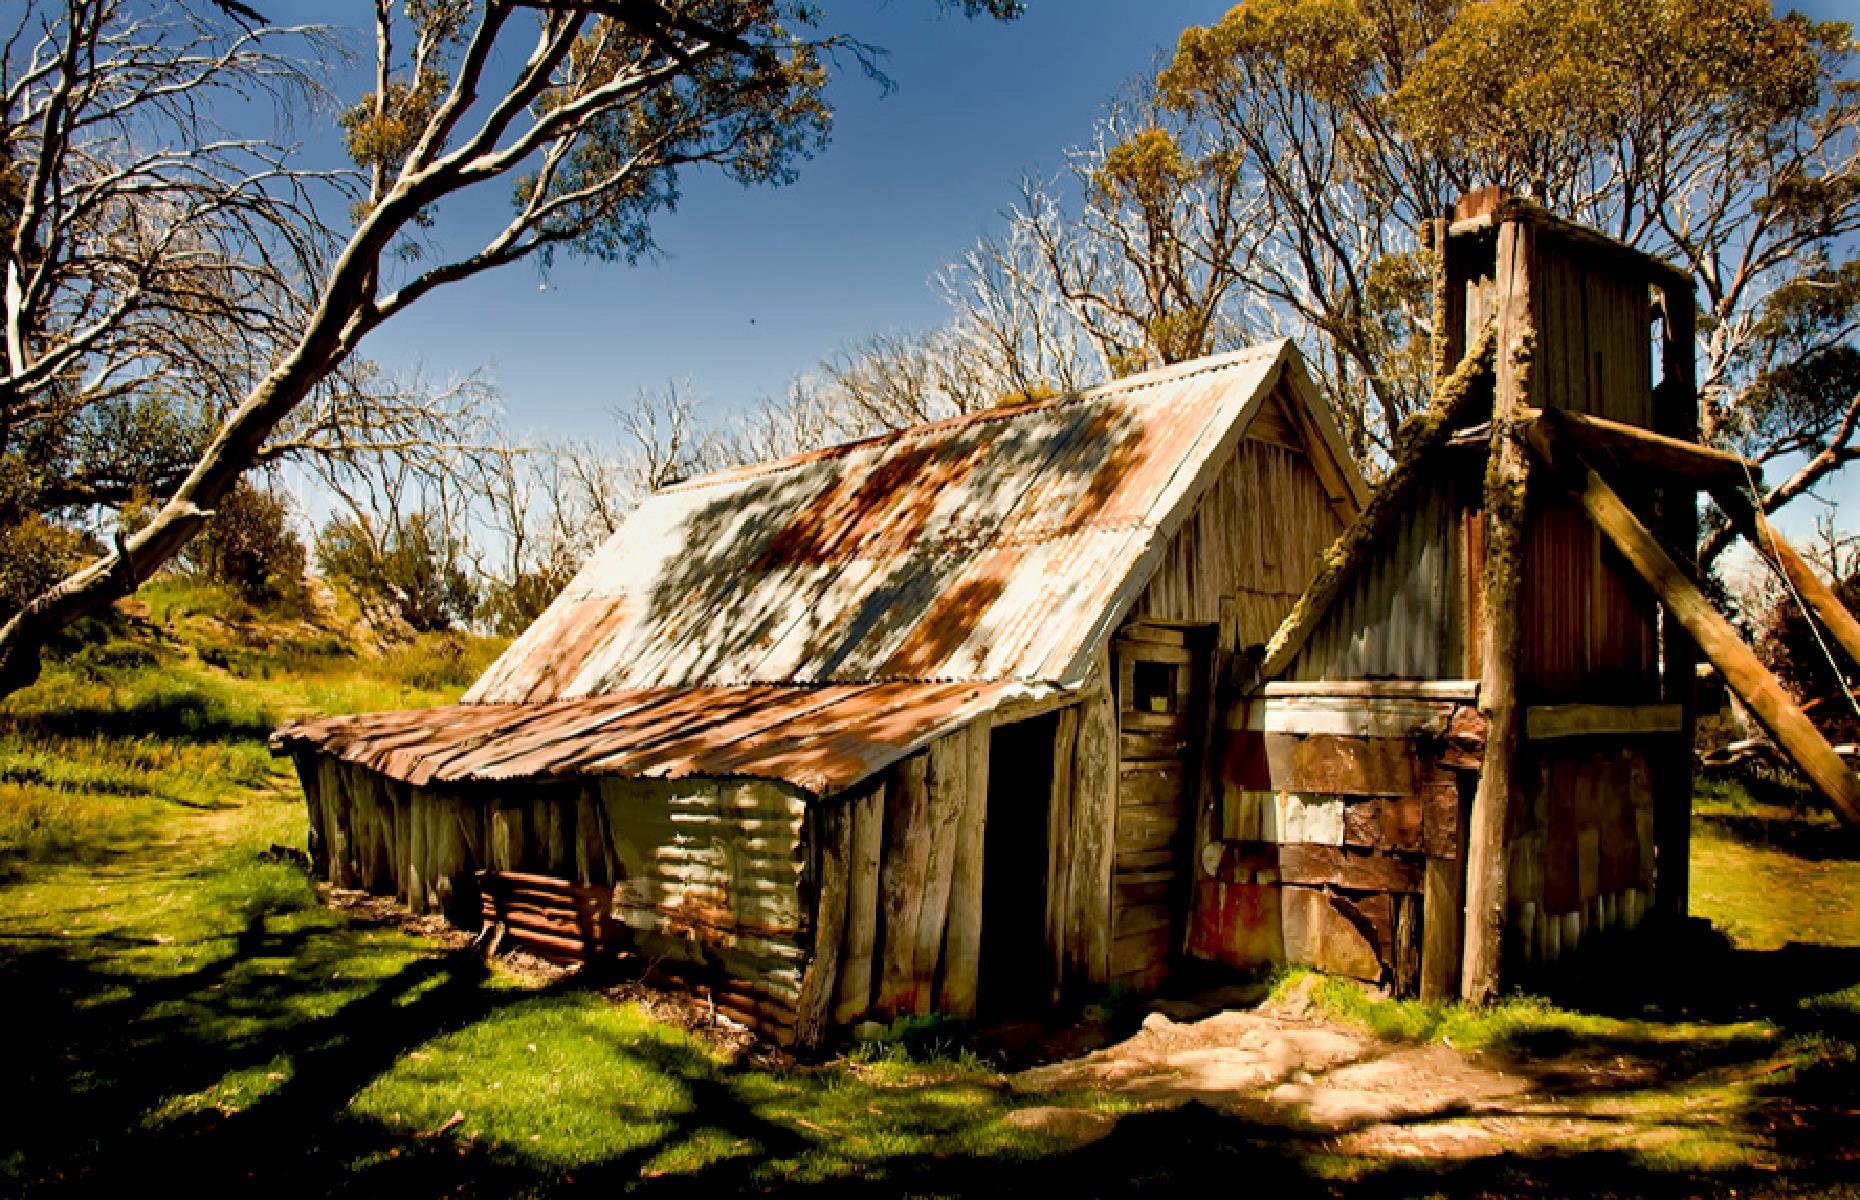 Victoria’s Alpine National Park is peppered with so-called High Country huts, some of which track back to the 1860s when early pastoralists lived and worked on this tough land. Others were built to shelter skiers. The wonderfully wonky Wallace’s Hut, pictured, is the oldest surviving cattlemen's hut. It was built in 1889 by the three Wallace brothers – Arthur, William and Stewart – and lies along the Wallace's Heritage Trail in the Bogong High Plains.